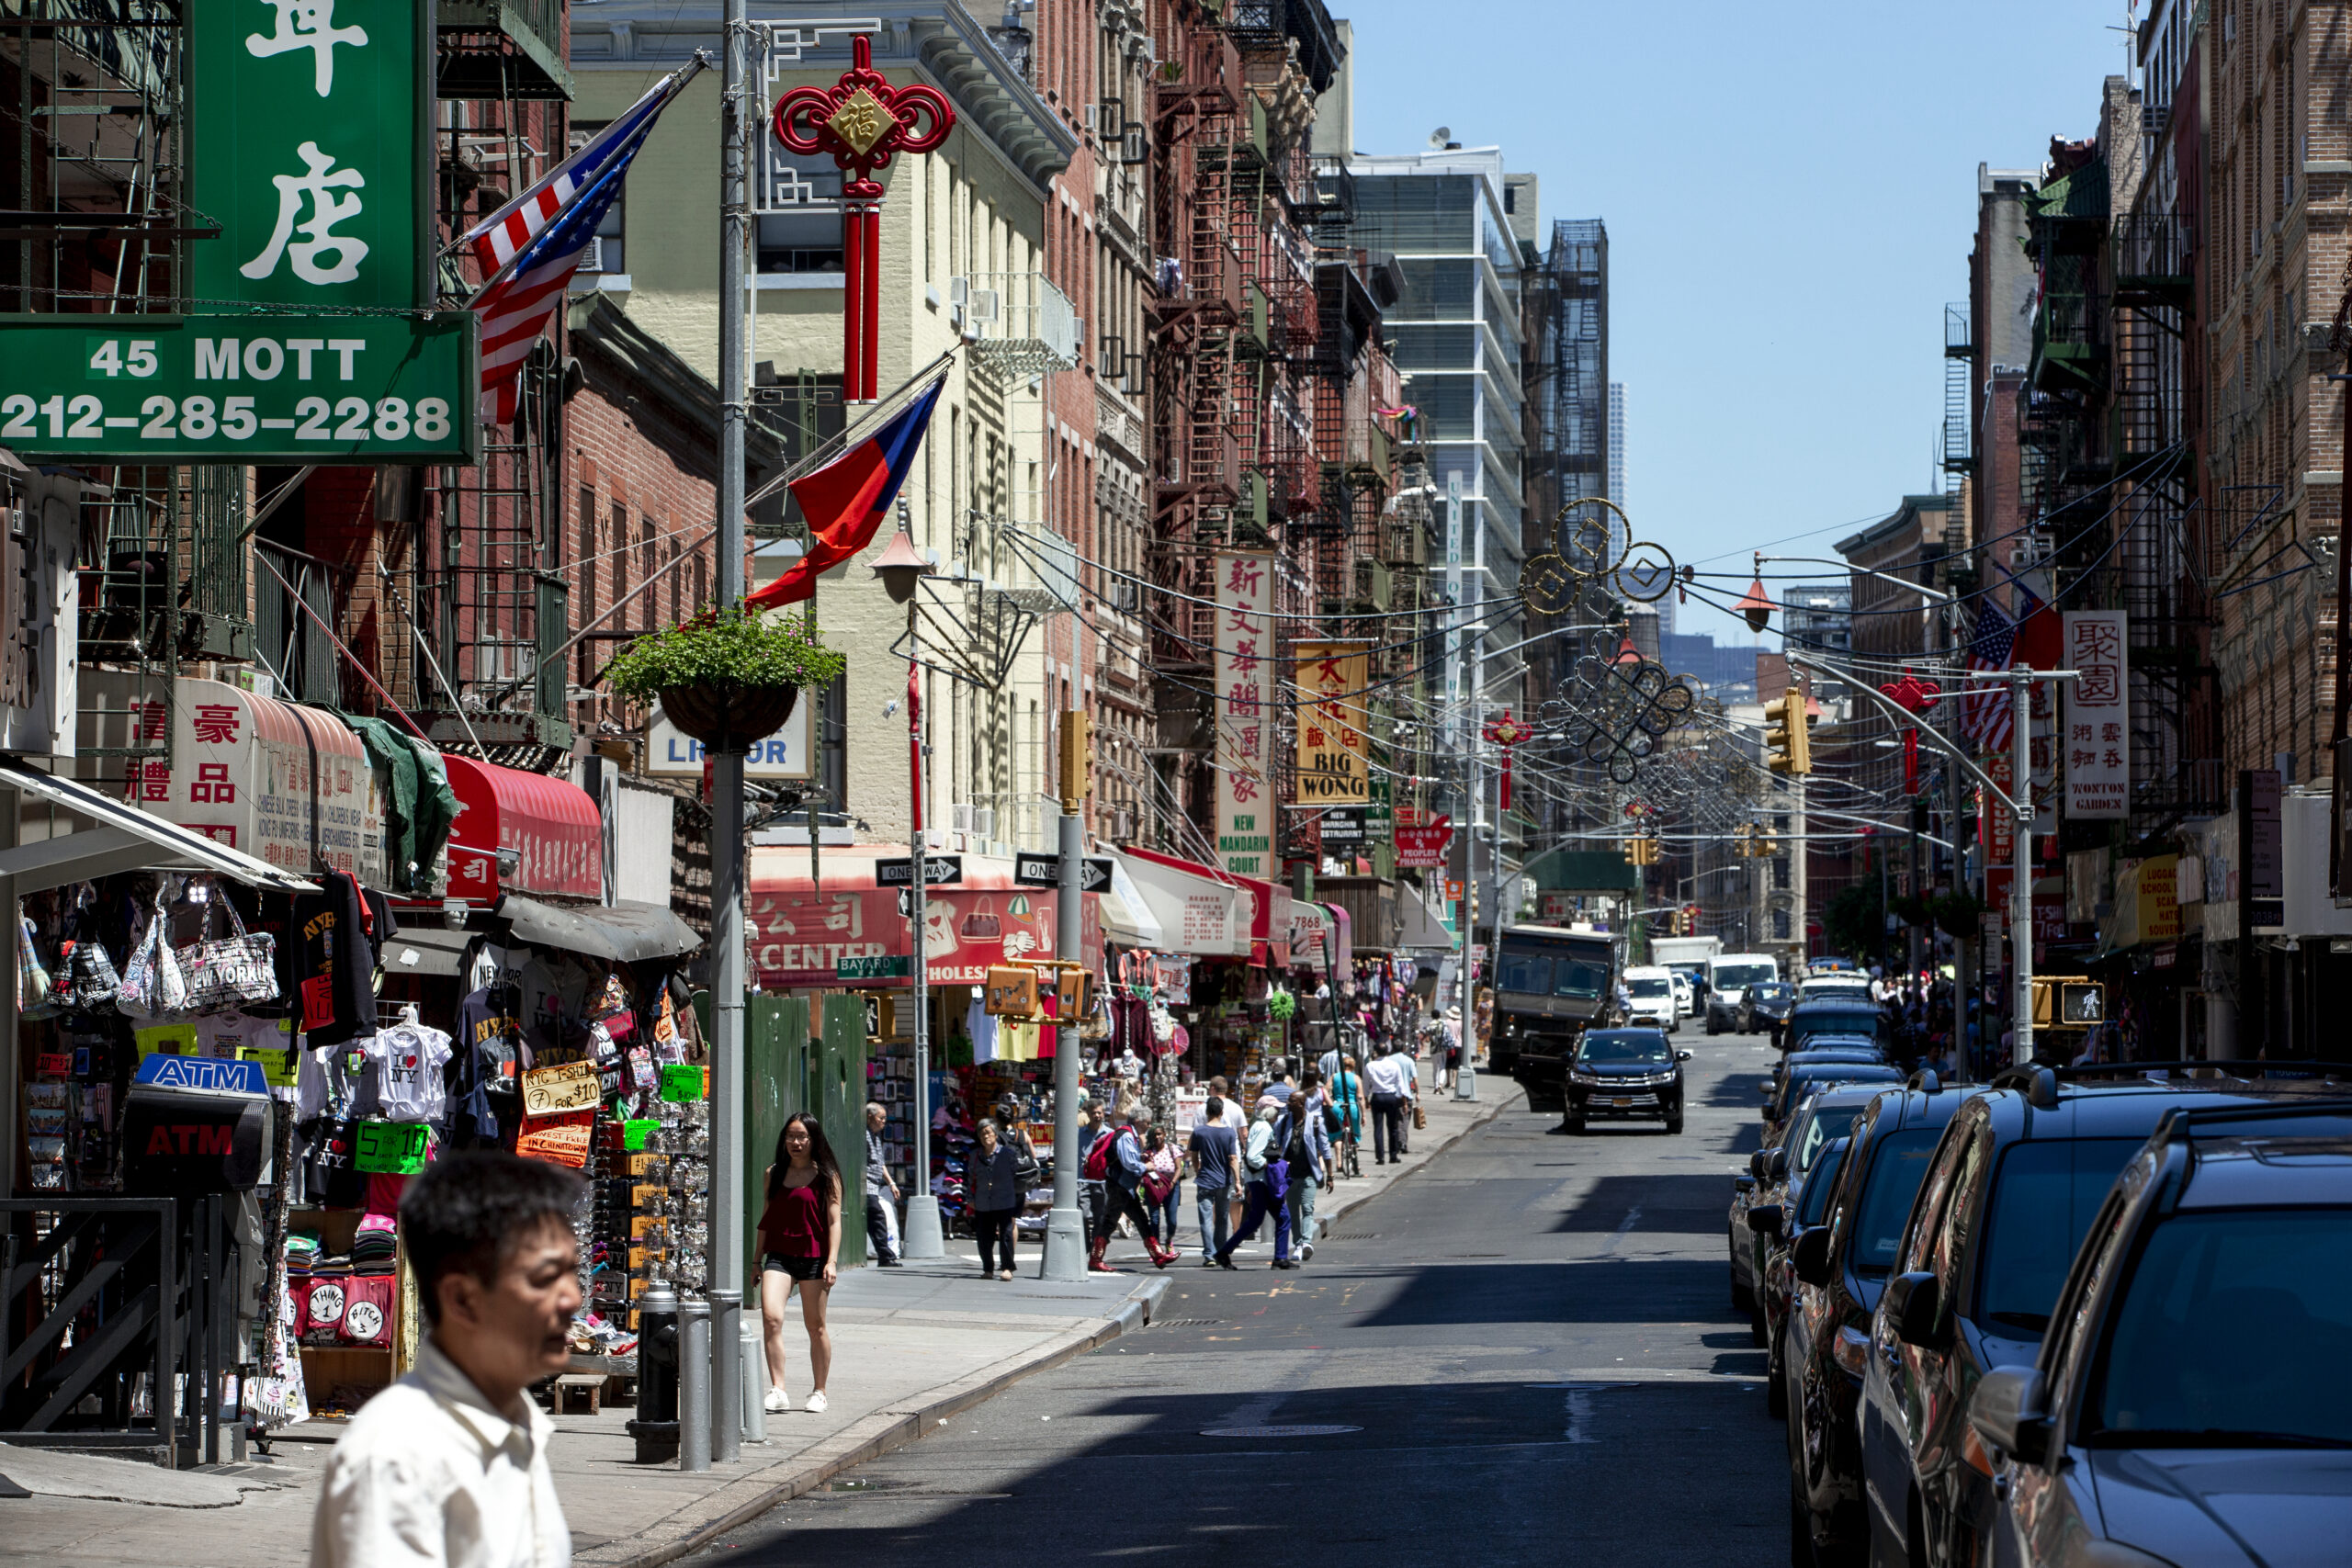 A street in Chinatown.